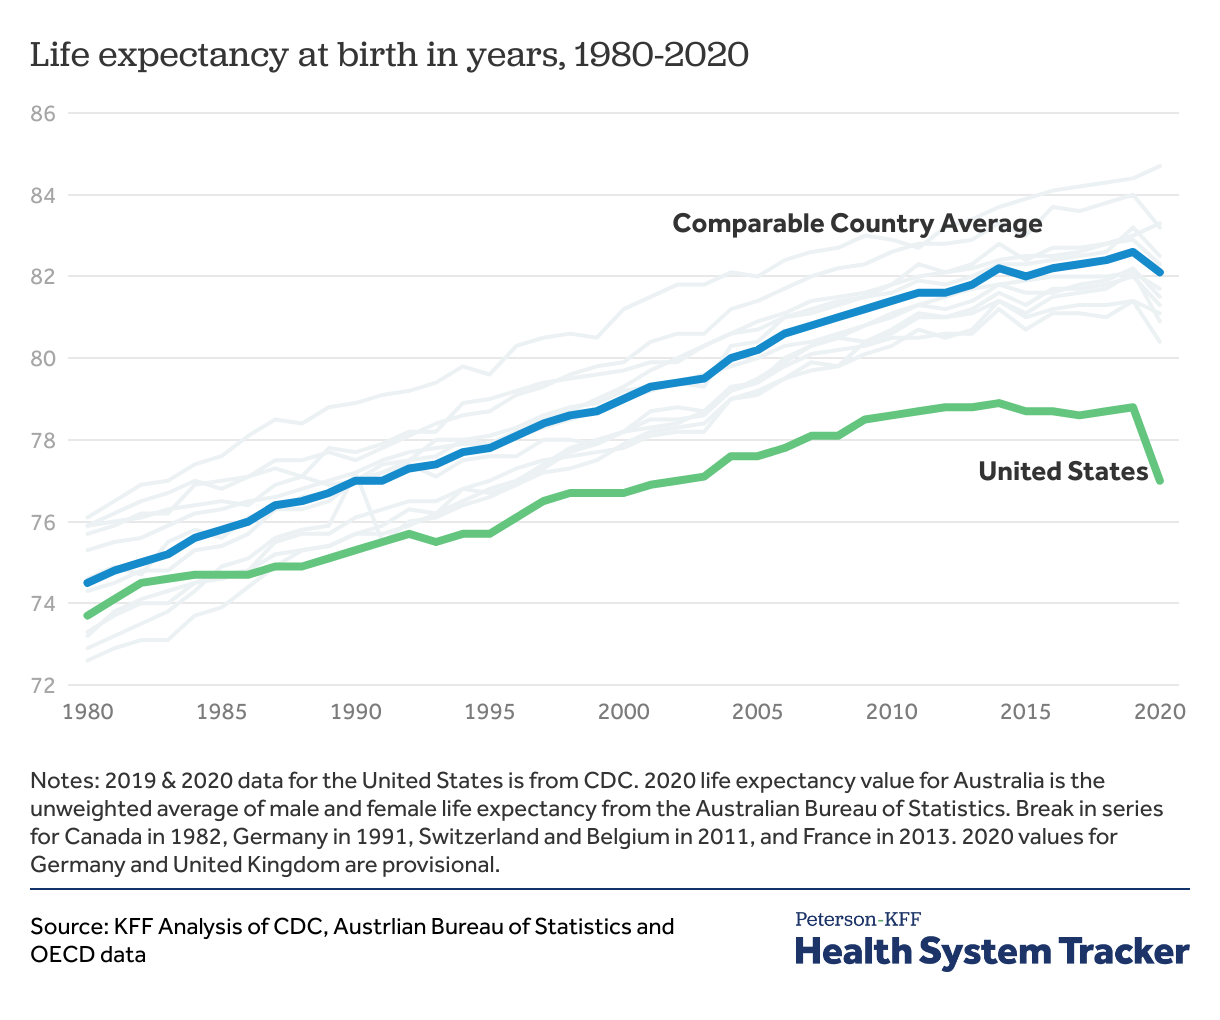 US life expectancy is lowest among peers. A graphic compares countries